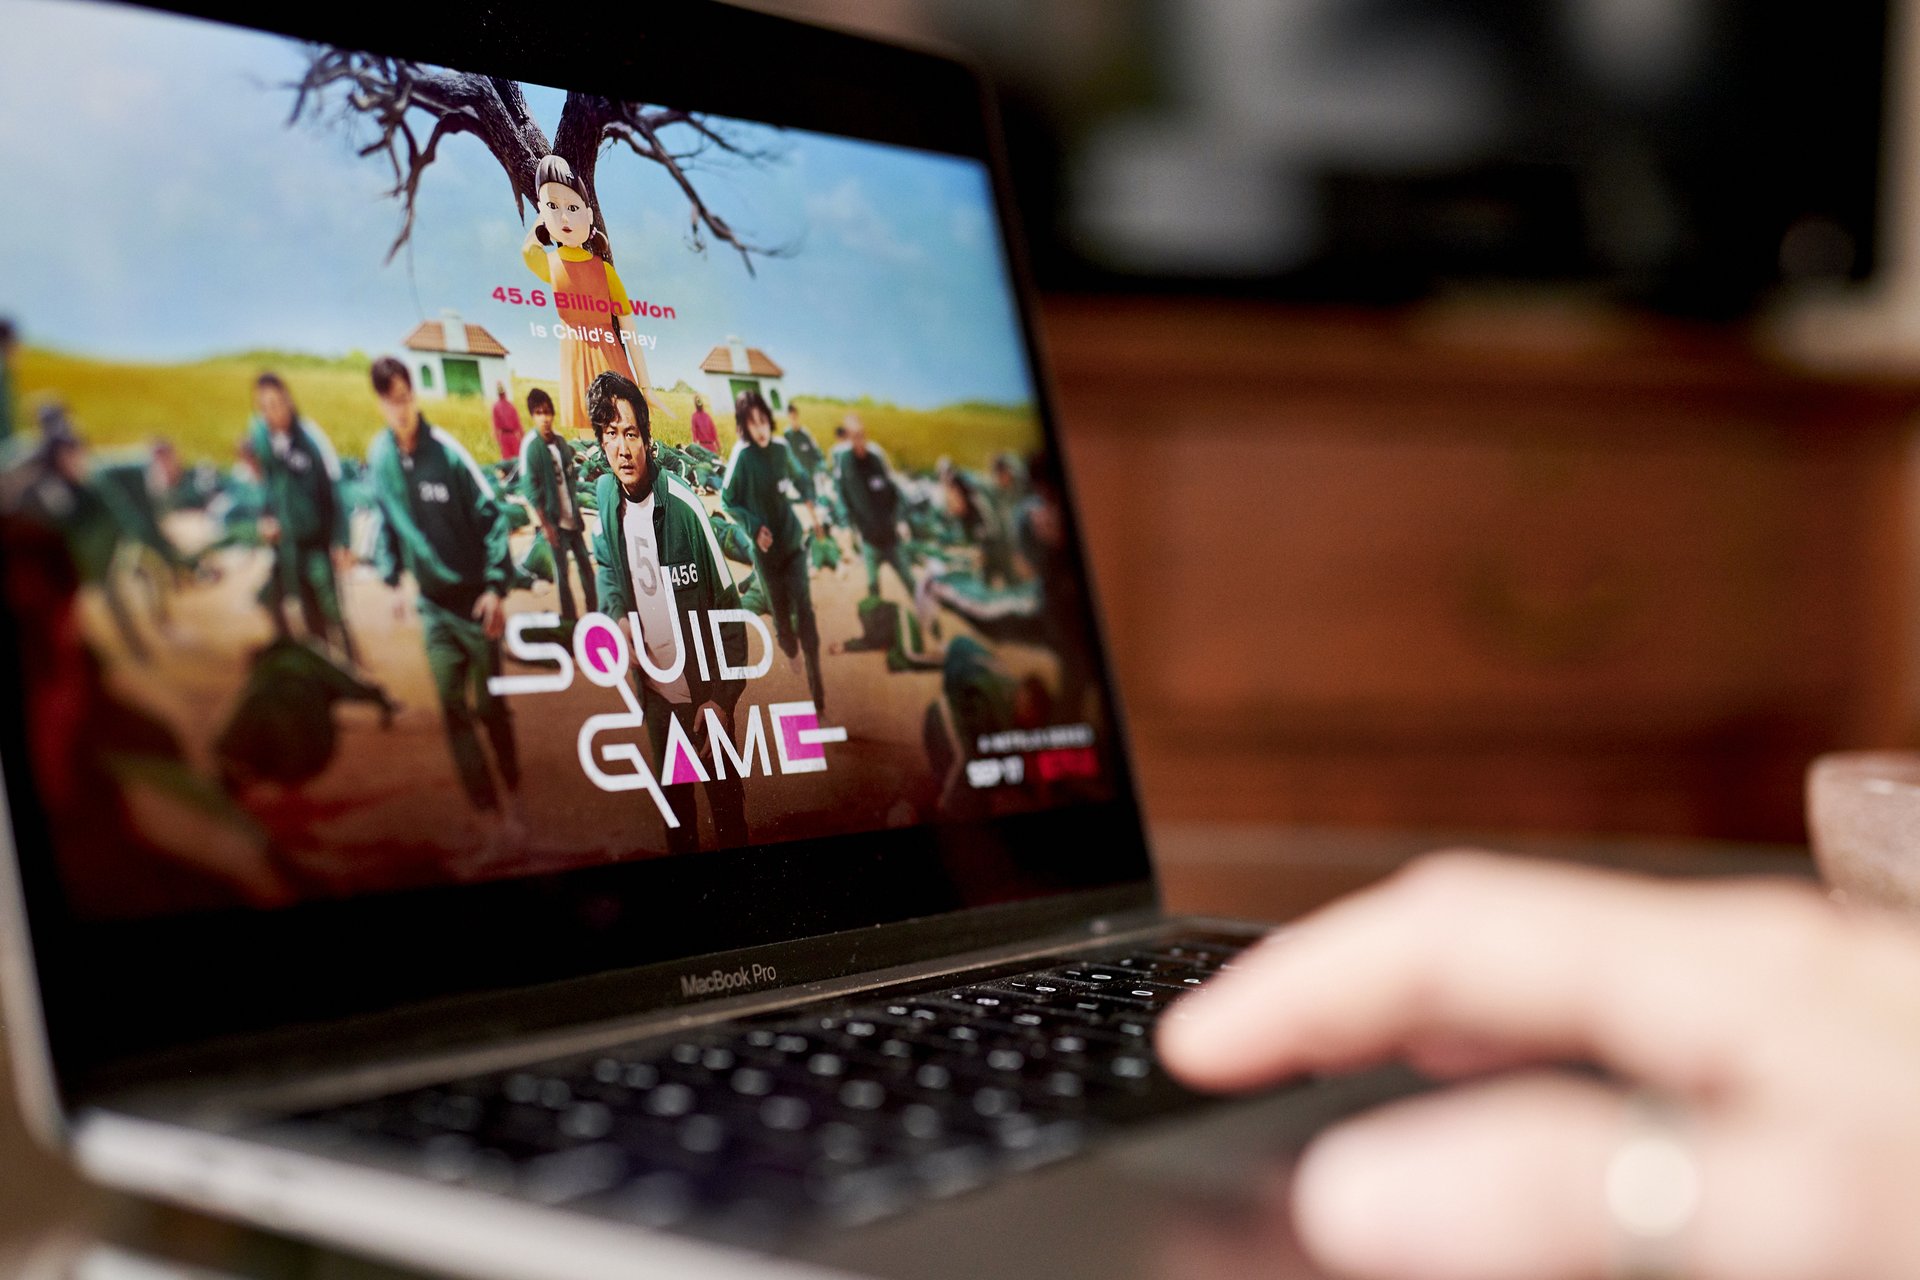 Close up of a laptop displaying a promo for the Netflix show Squid Game.